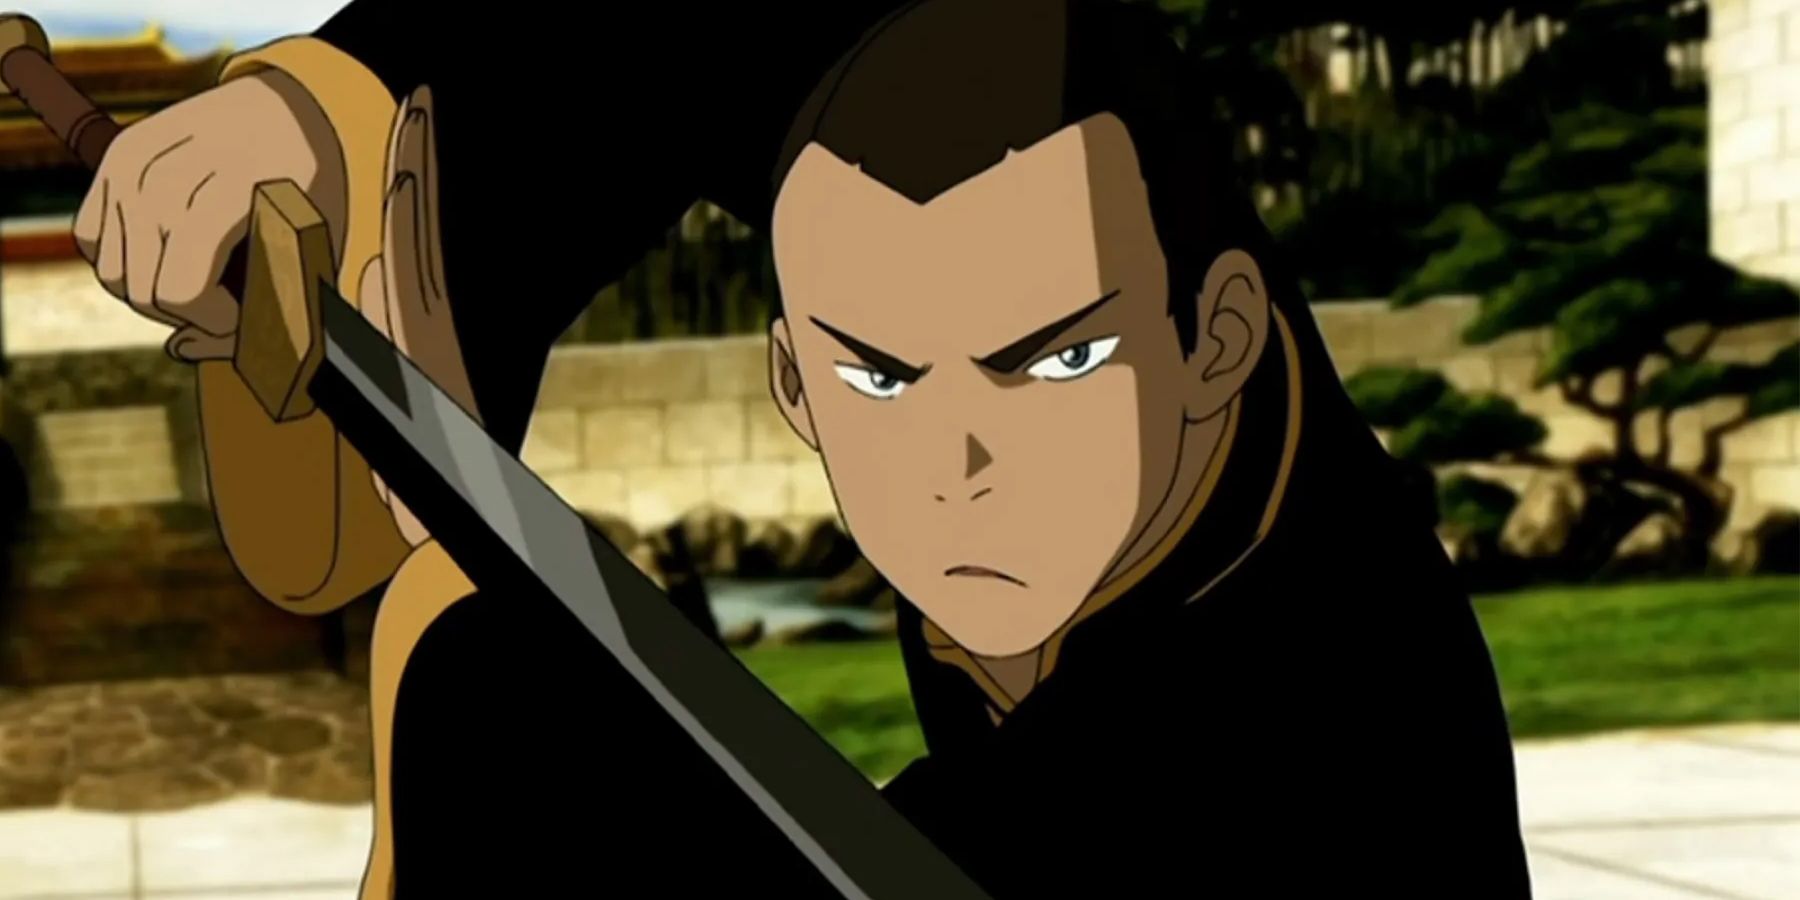 Sokka in the Last Airbender wearing Apprentice Clothes